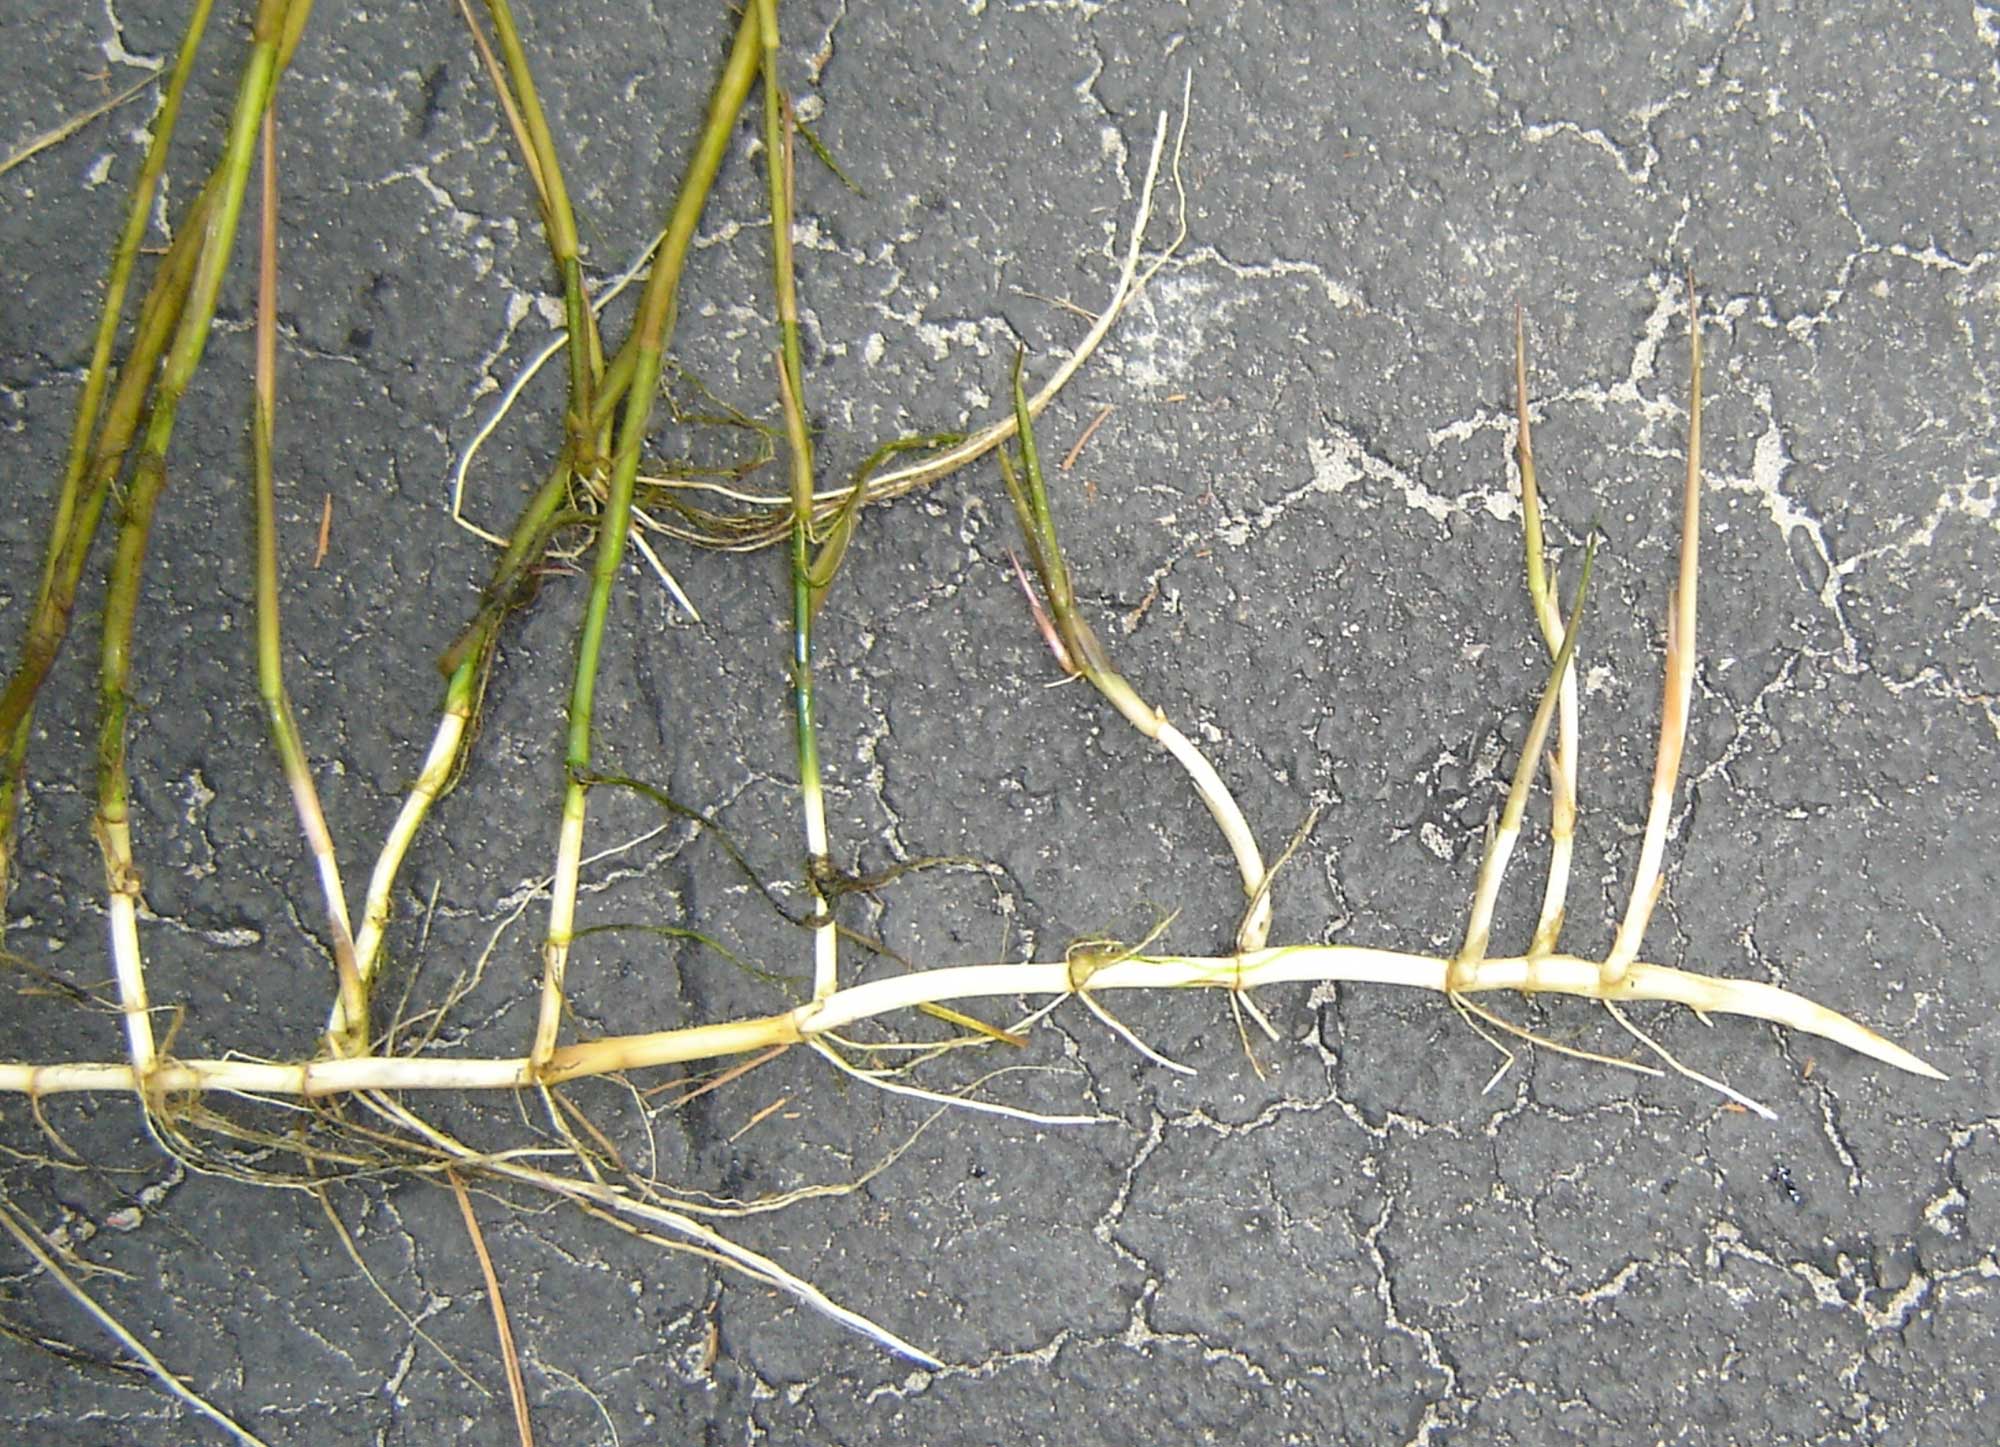 Photograph of an inflorescence of torpedograss. The photo shows a torpedograss plant that has been dug up and placed on asphalt. The rhizome is nearly white and extends horizontally near the bottom of the image with its apex to the right. Green aerial shoots with leaves extend from the upper size of the rhizome, and roots extend from the lower side.